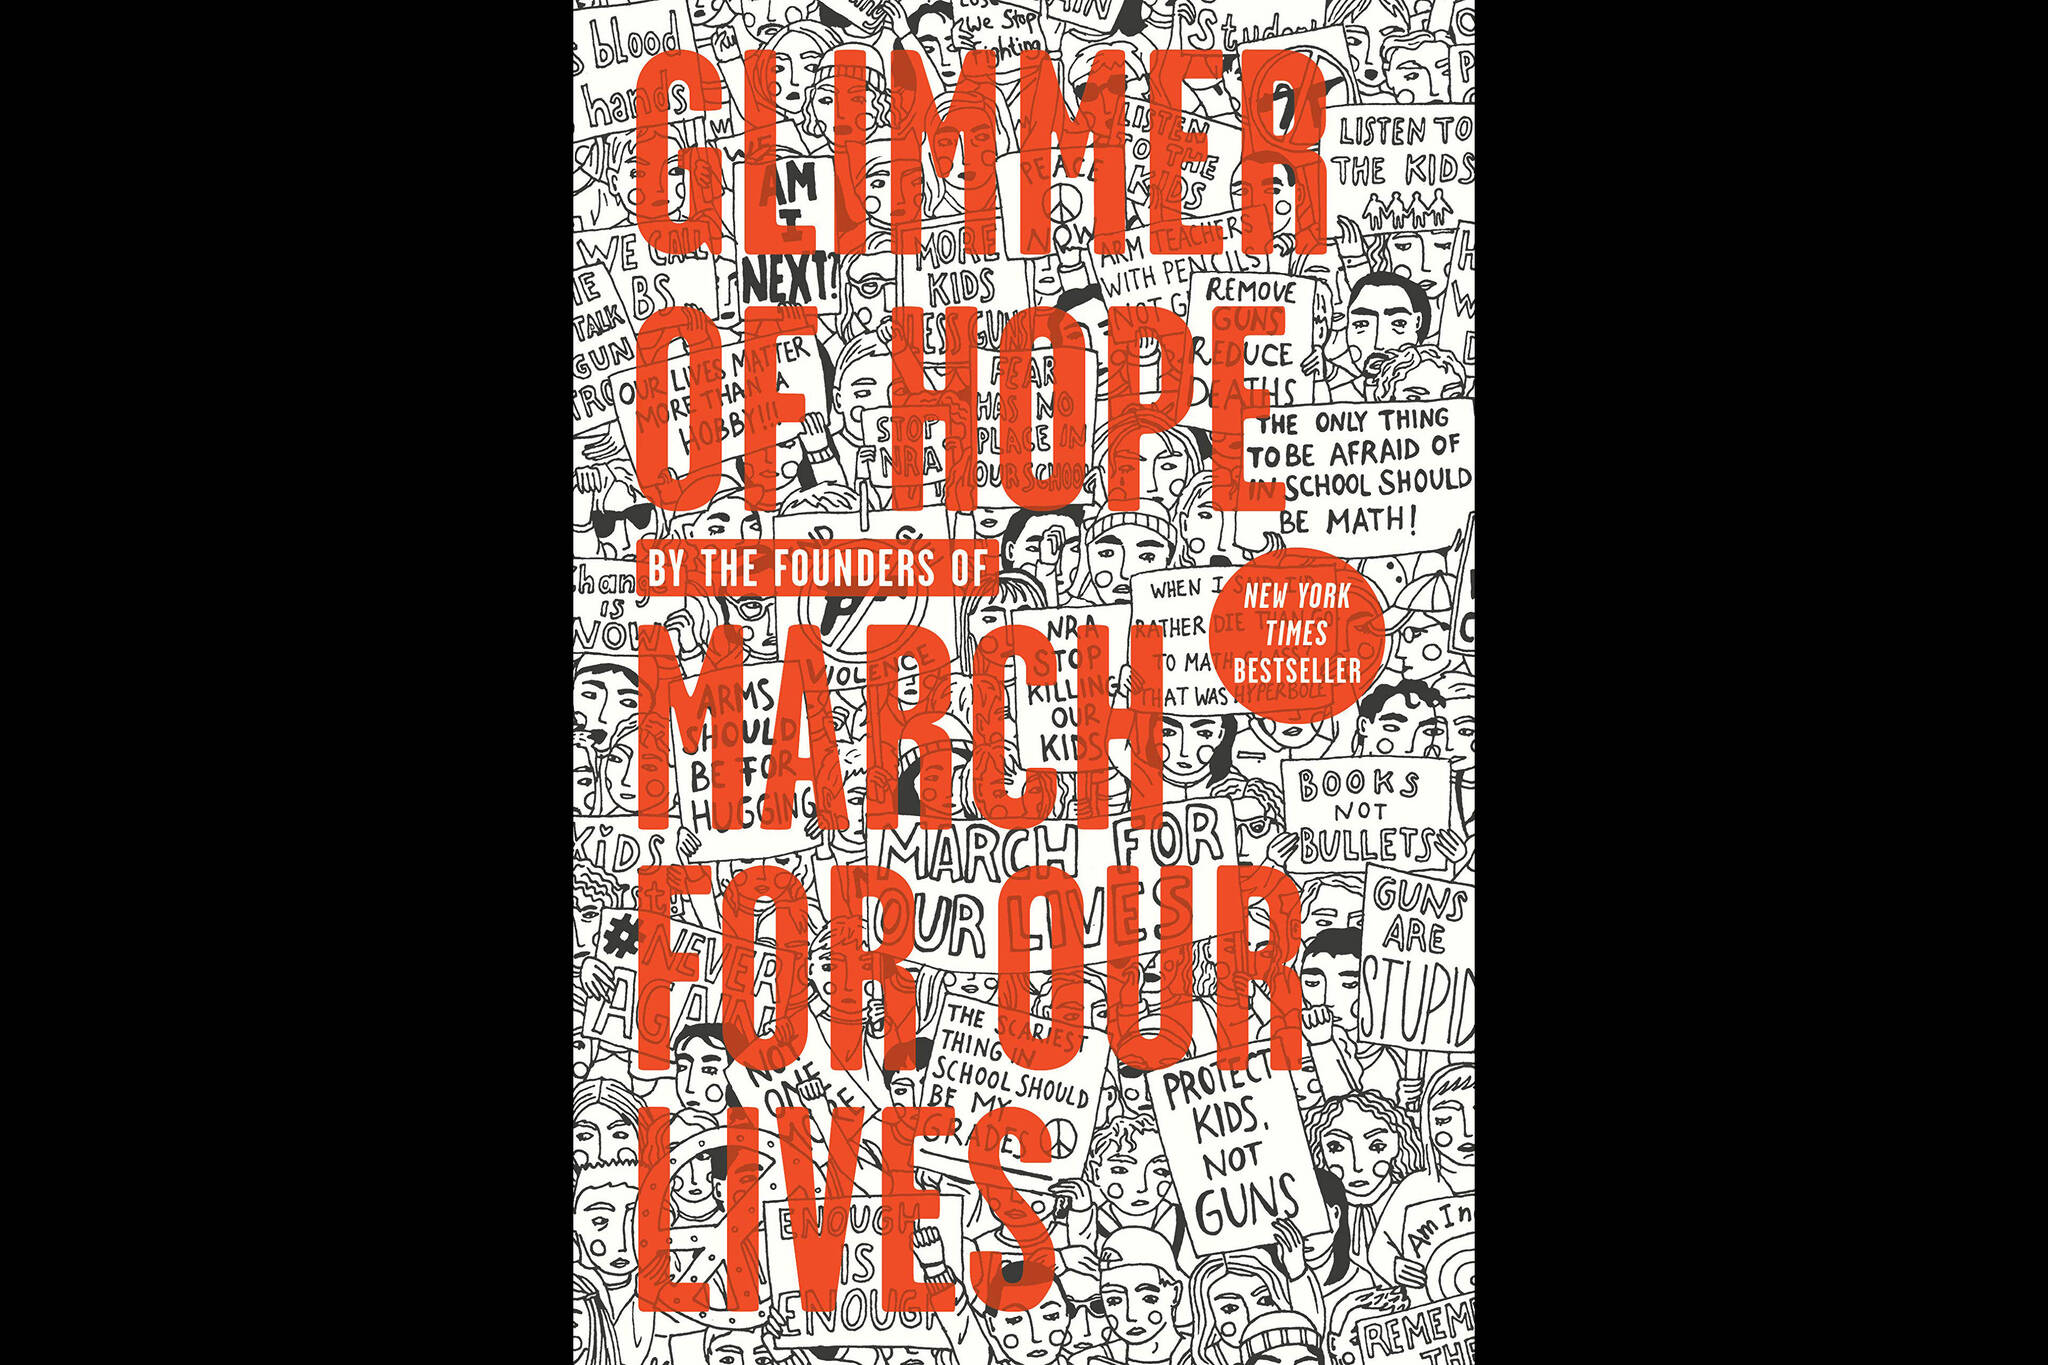 “Glimmer of Hope: How Tragedy Sparked a Movement” was published in 2018 by Razorbill and Dutton, imprints of Penguin Random House LLC. (Image via amazon.com)